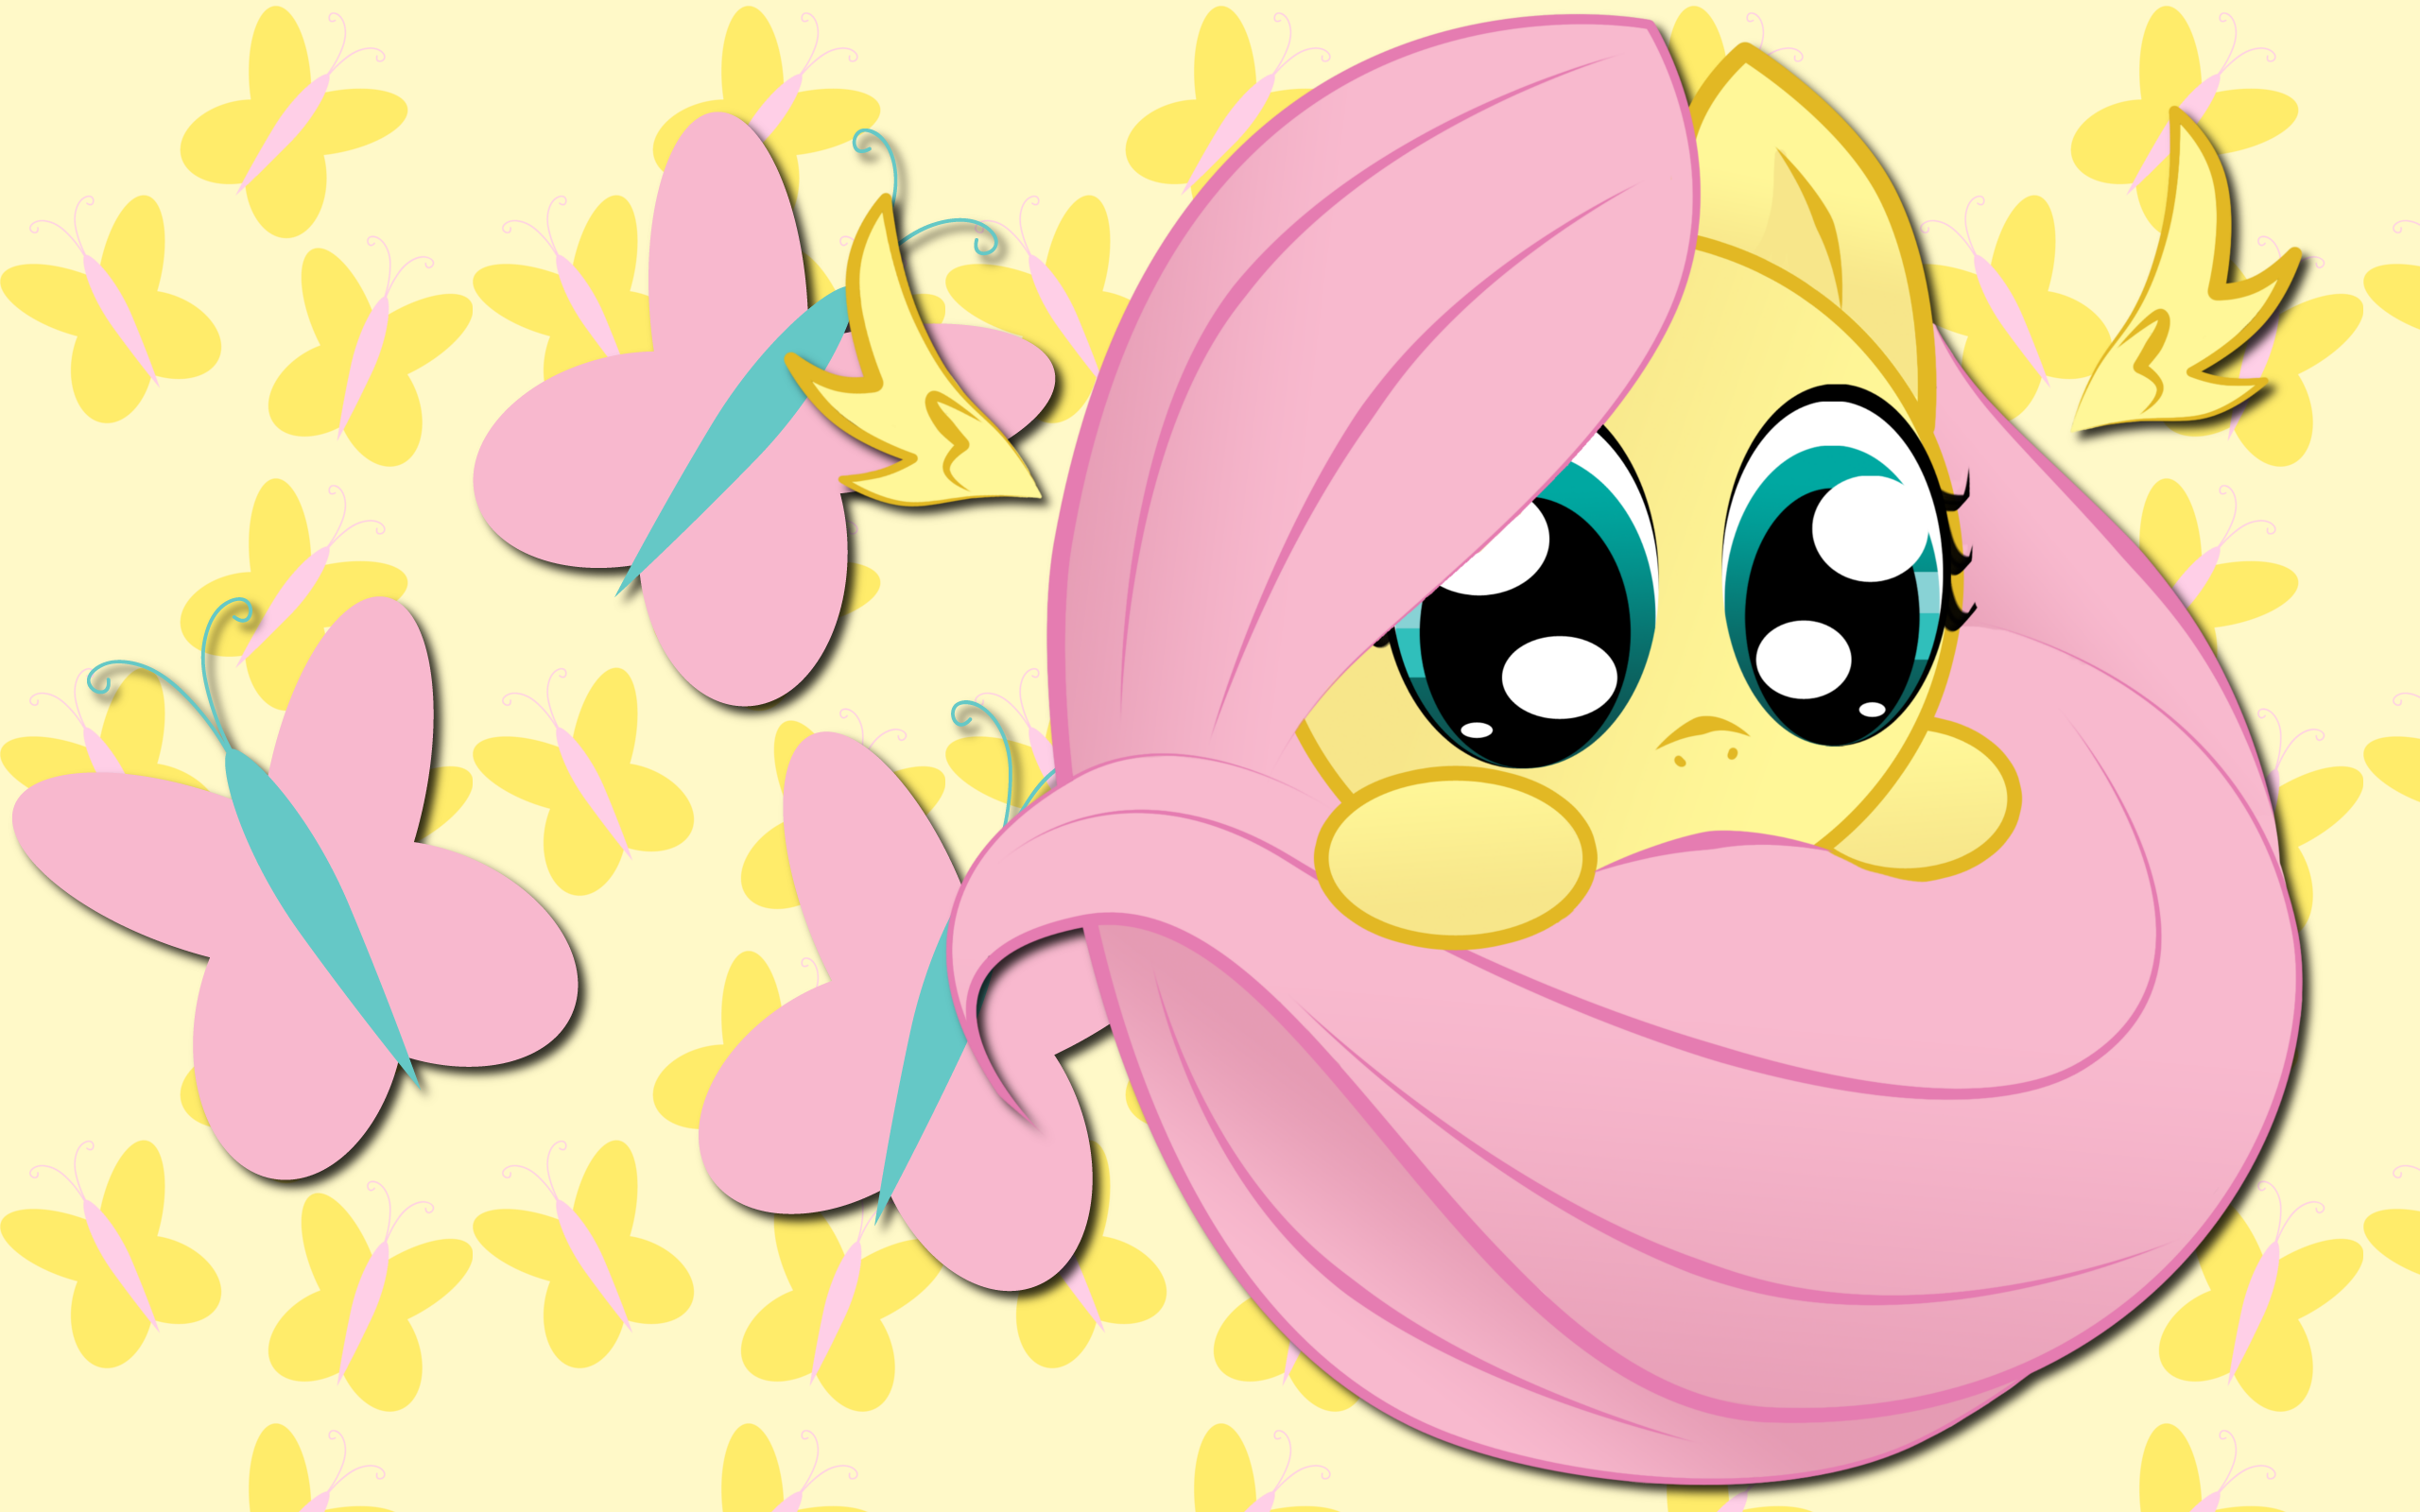 Fluttershy Sphere WP by AliceHumanSacrifice0, ooklah and Zackira